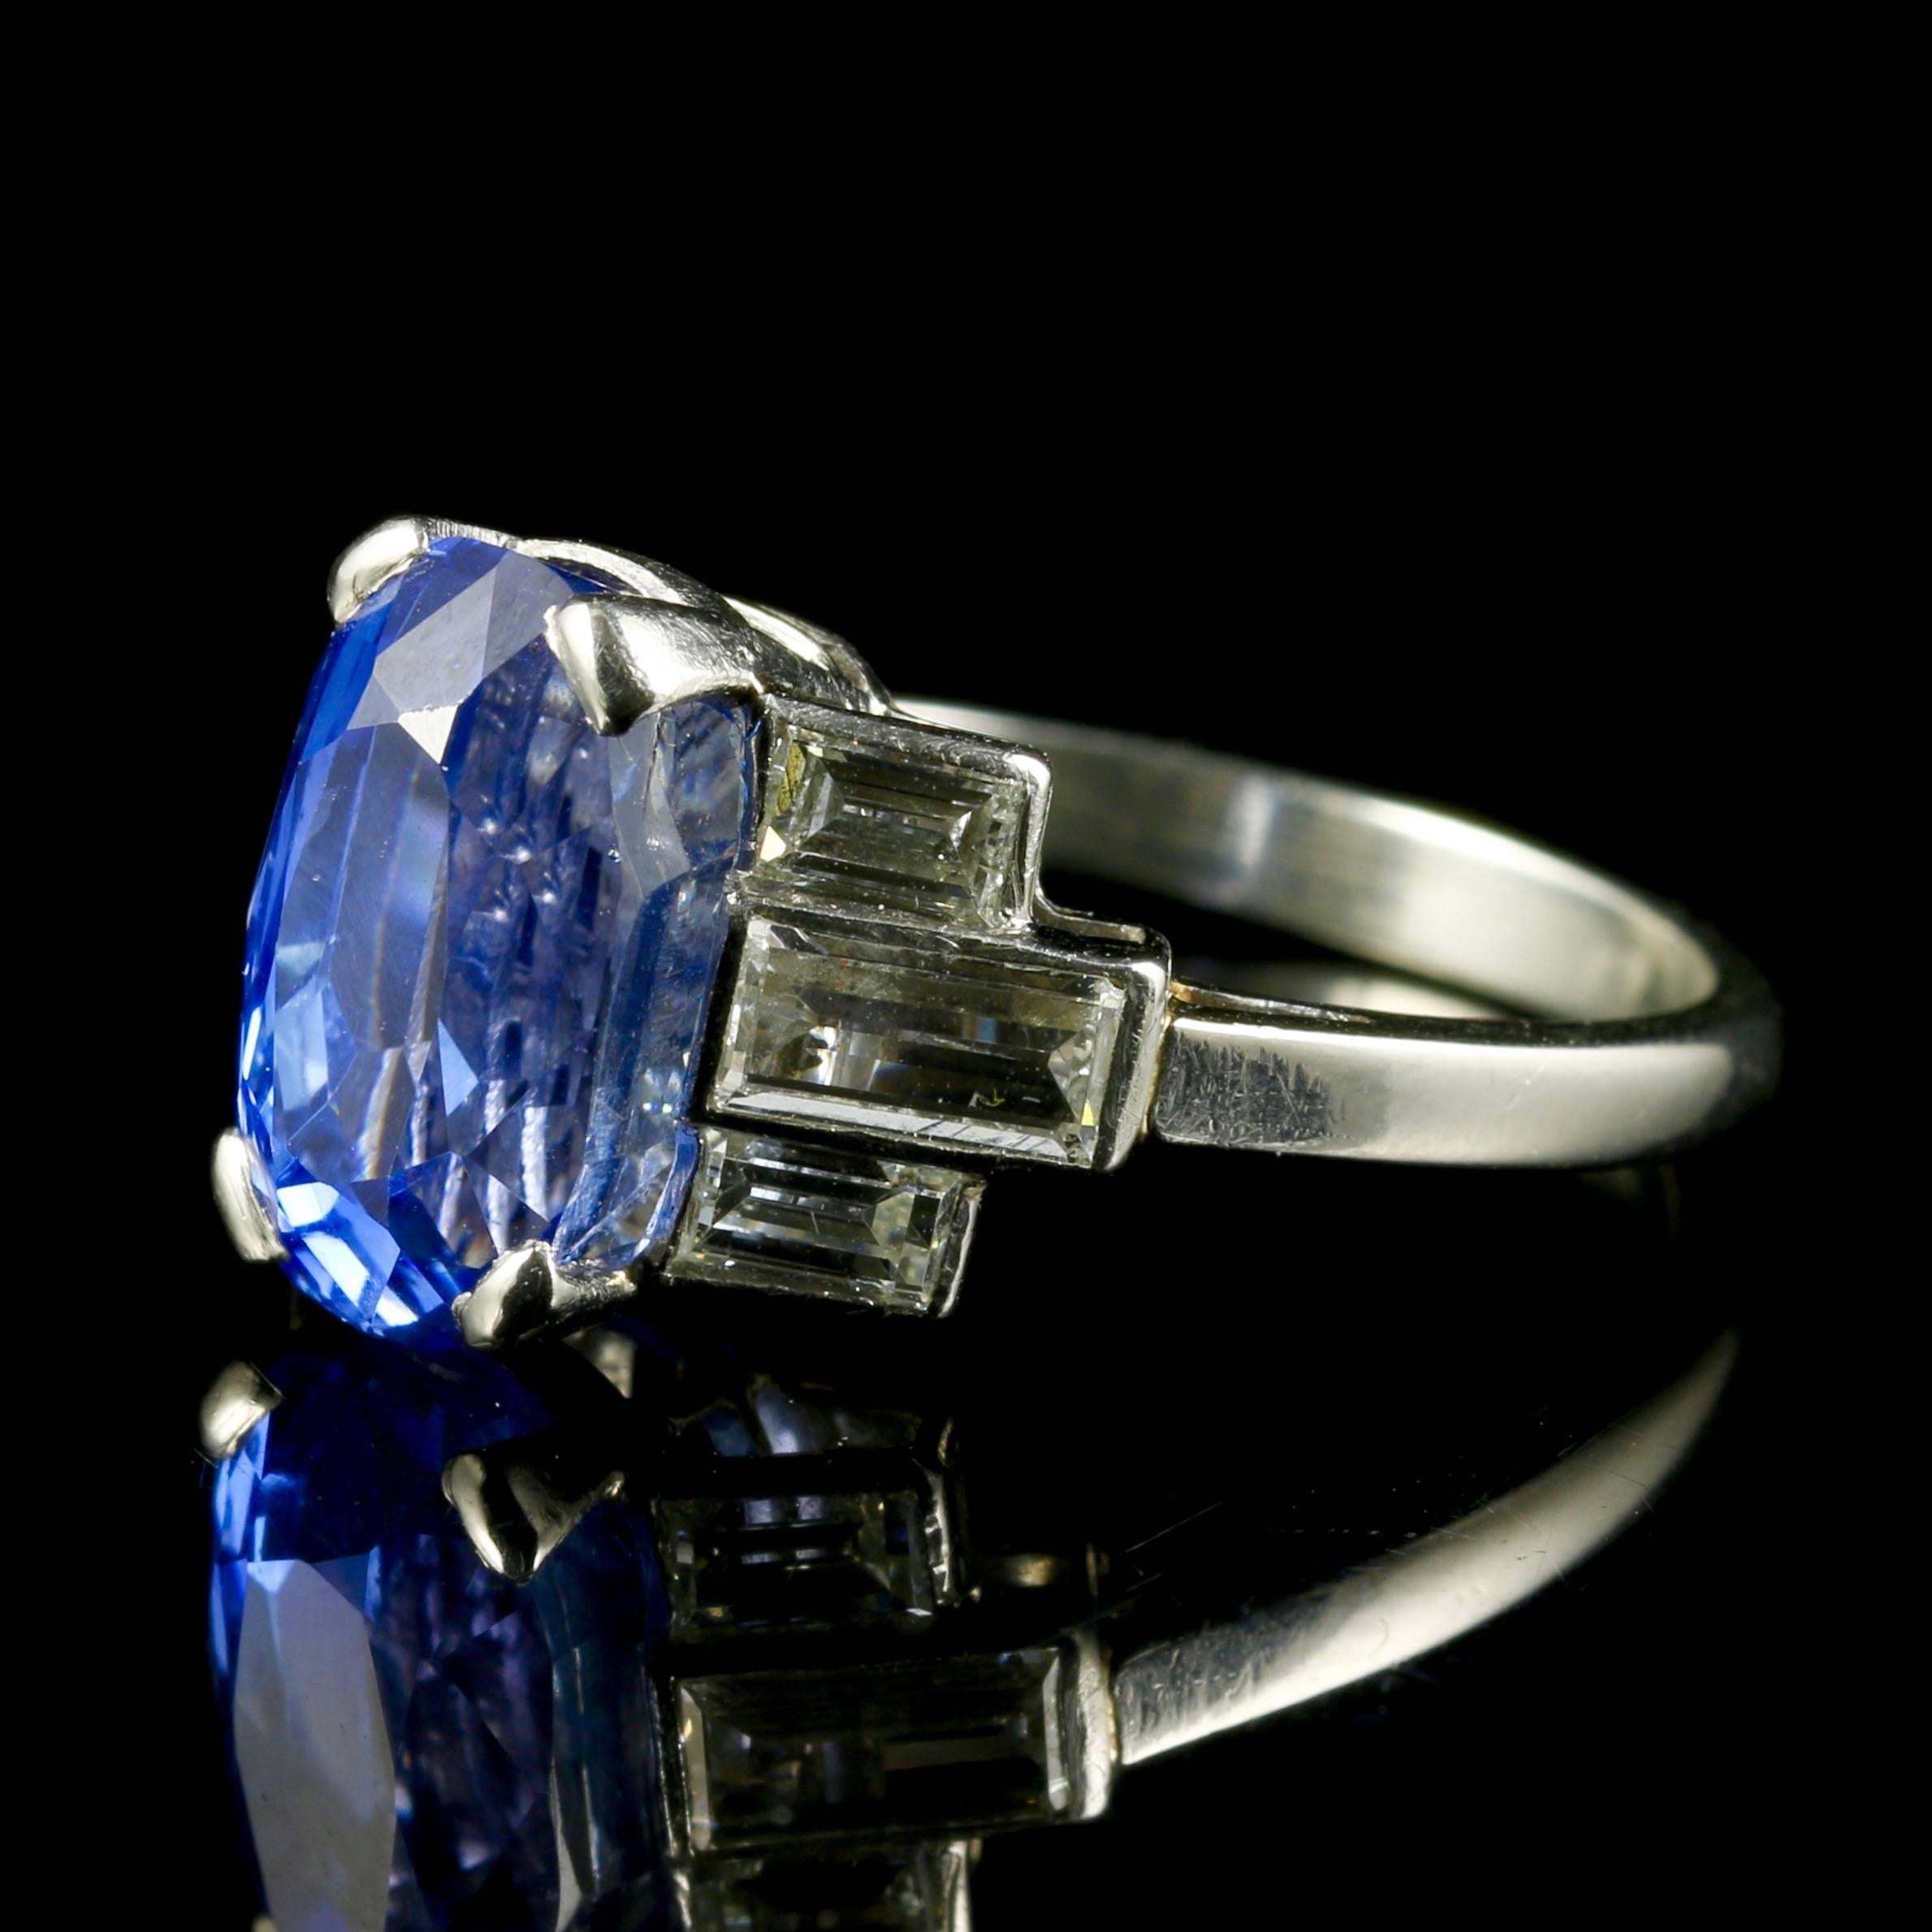 This is a genuine Art Deco all platinum sapphire and diamond ring, which is Circa 1920.

The ring is stunning set with a 3.80ct sapphire in the centre which is surrounded by magnificent baguette cut diamonds.

The baguette cut diamonds are VS1 H